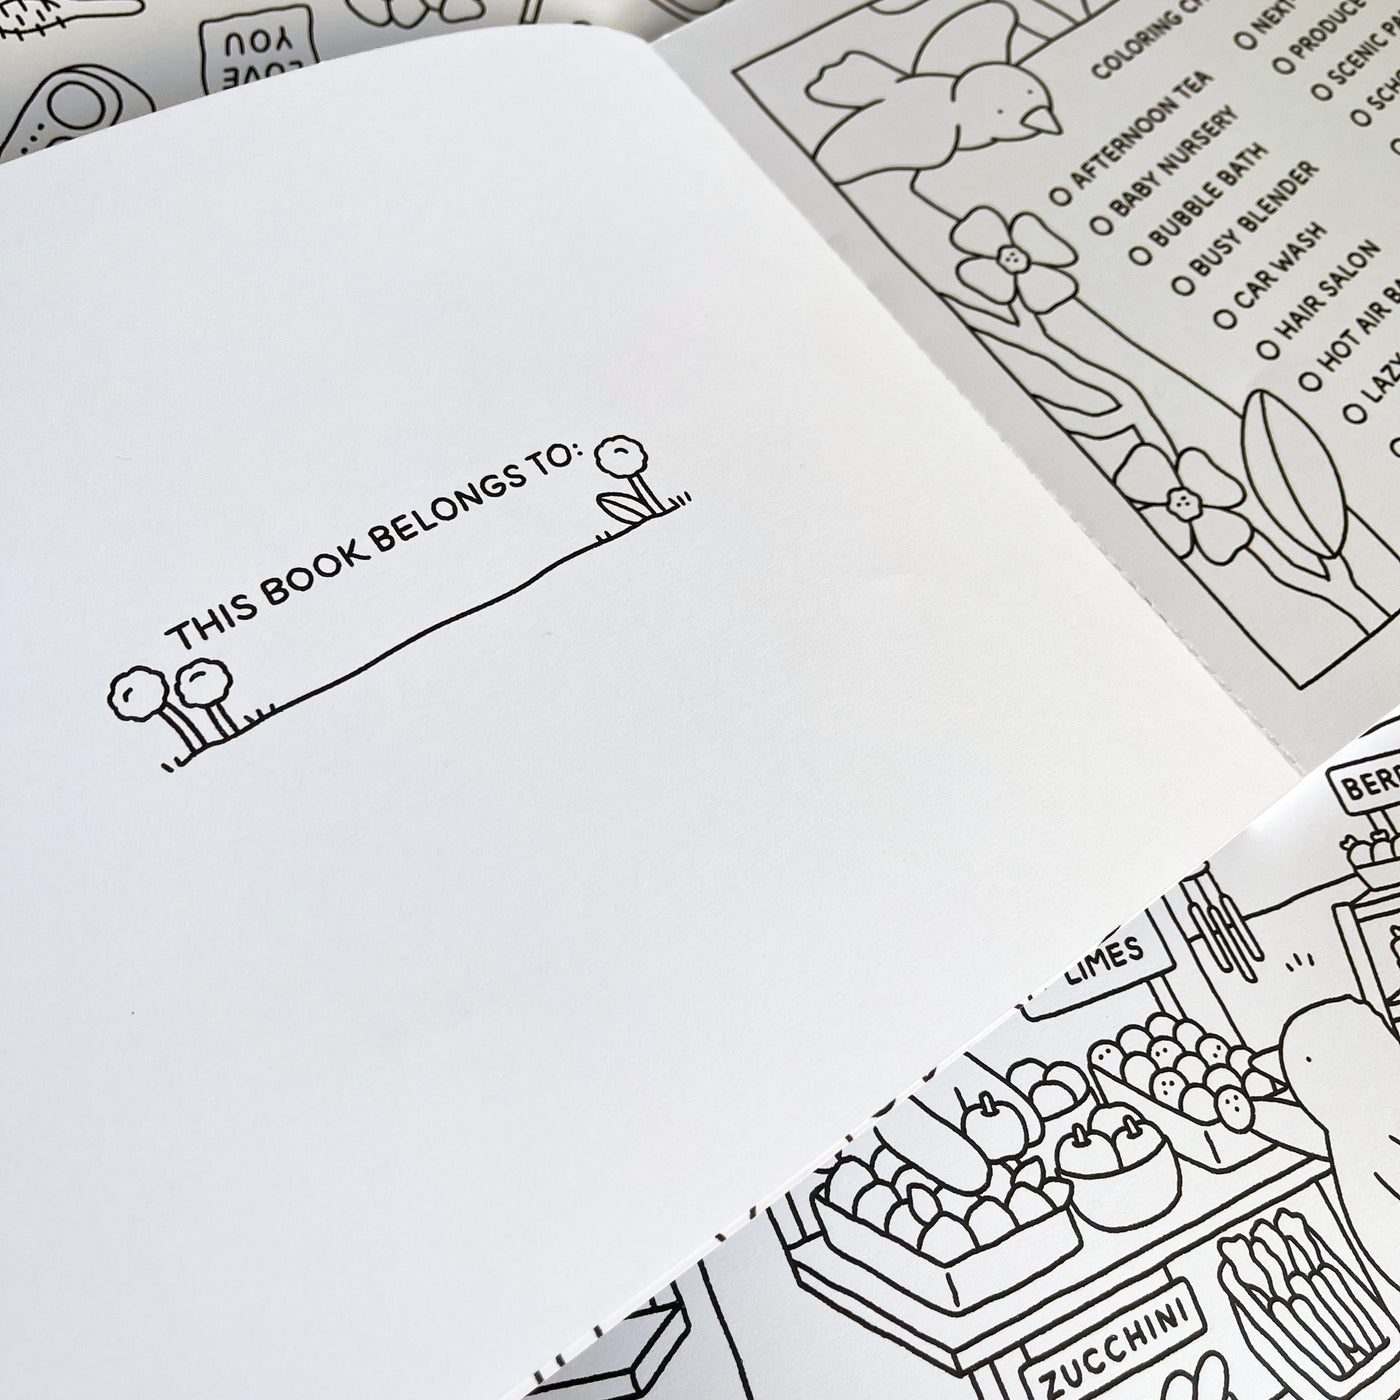 Bobbie Goods Coloring Book: Unofficial Coloring Book for Kids and All Fans.  The boobiegoods Coloring Book for Children and Kids by Netta Publish